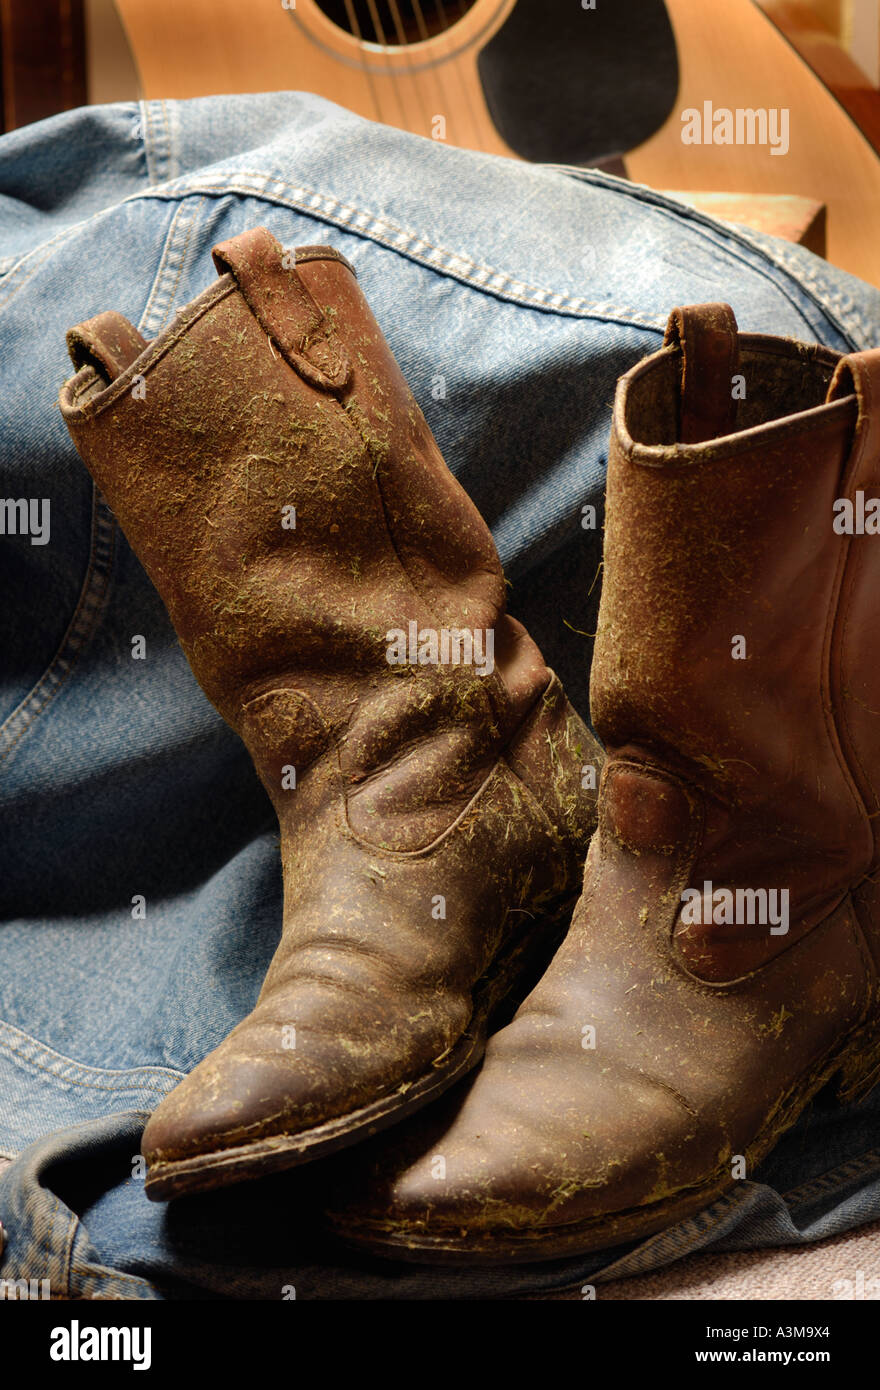 Cowboy boots covered in dried hay and grass and worn out leather against an old denim jacket with guitar Canada Stock Photo